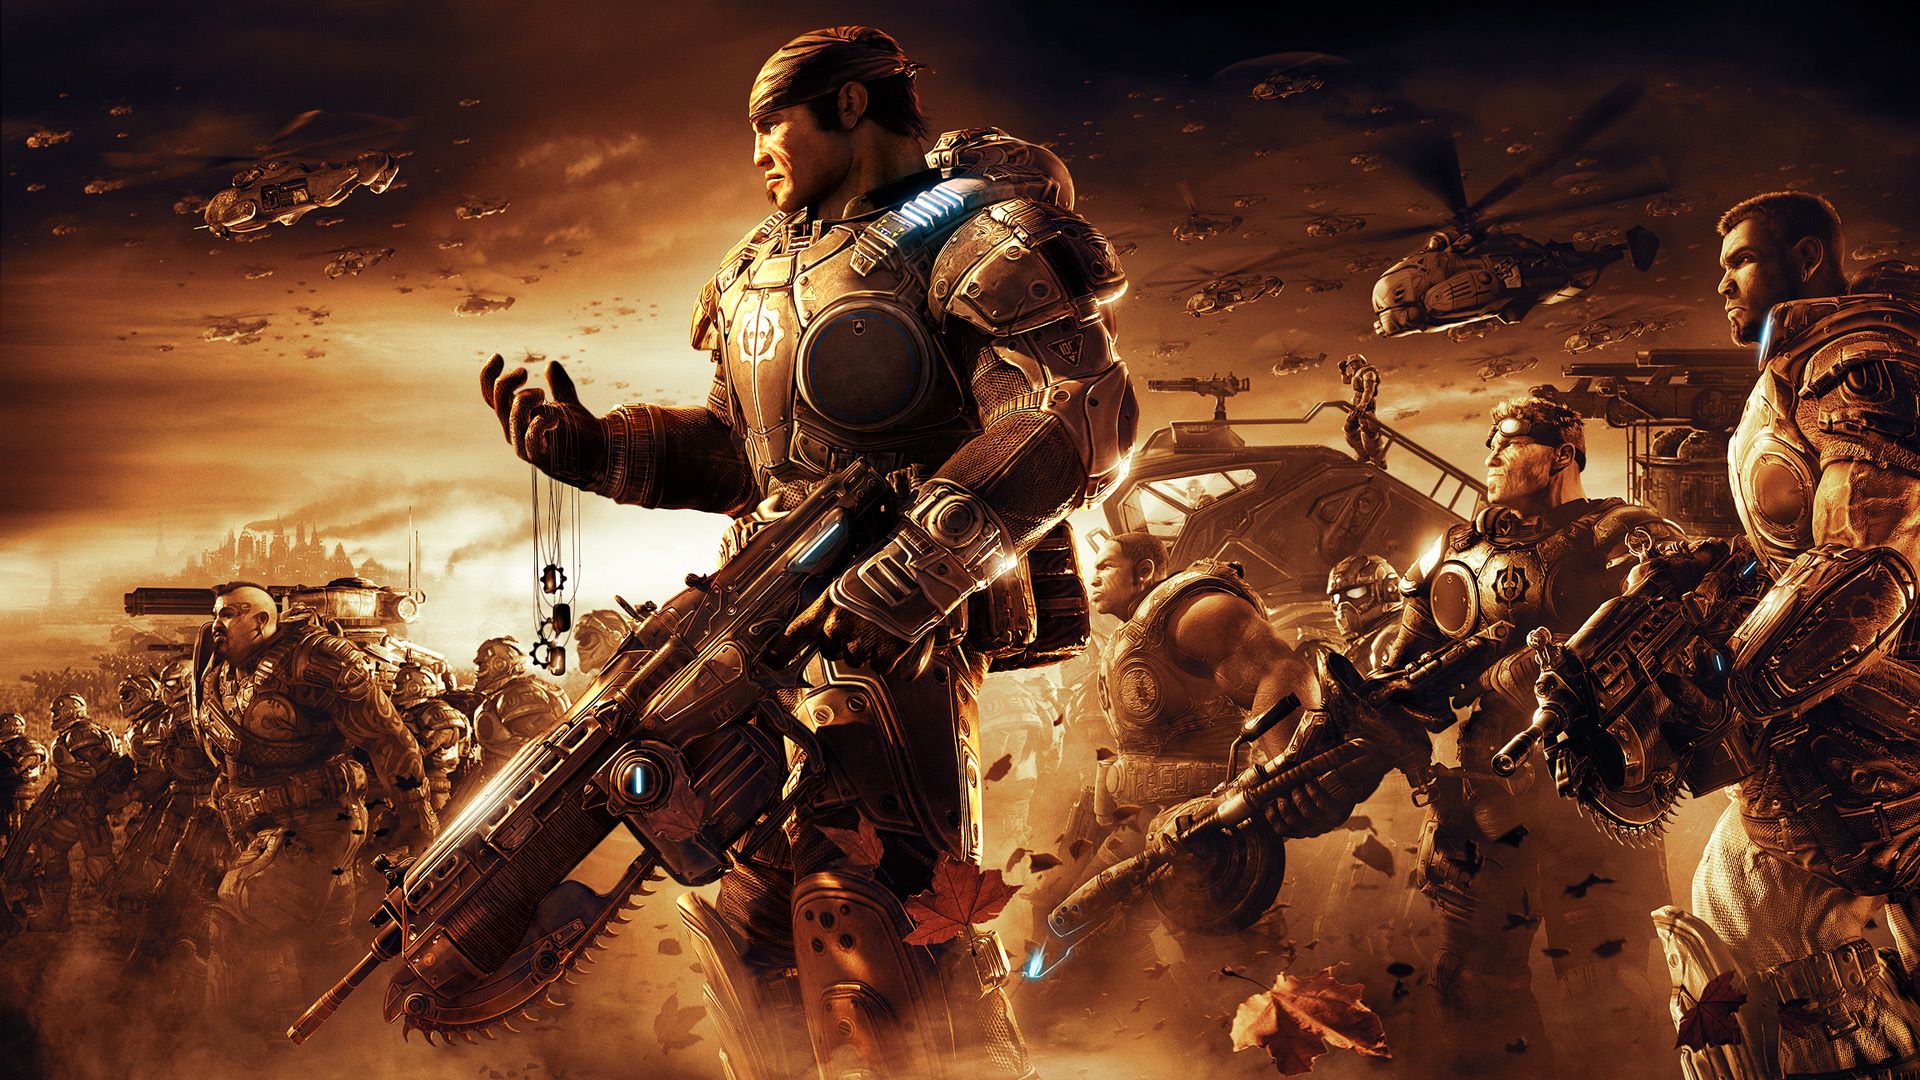 hidrógeno primer ministro desenterrar Epic Games “Didn't Really Know What to Do” with Gears of War Before Selling  it to Xbox – Cliff Bleszinski